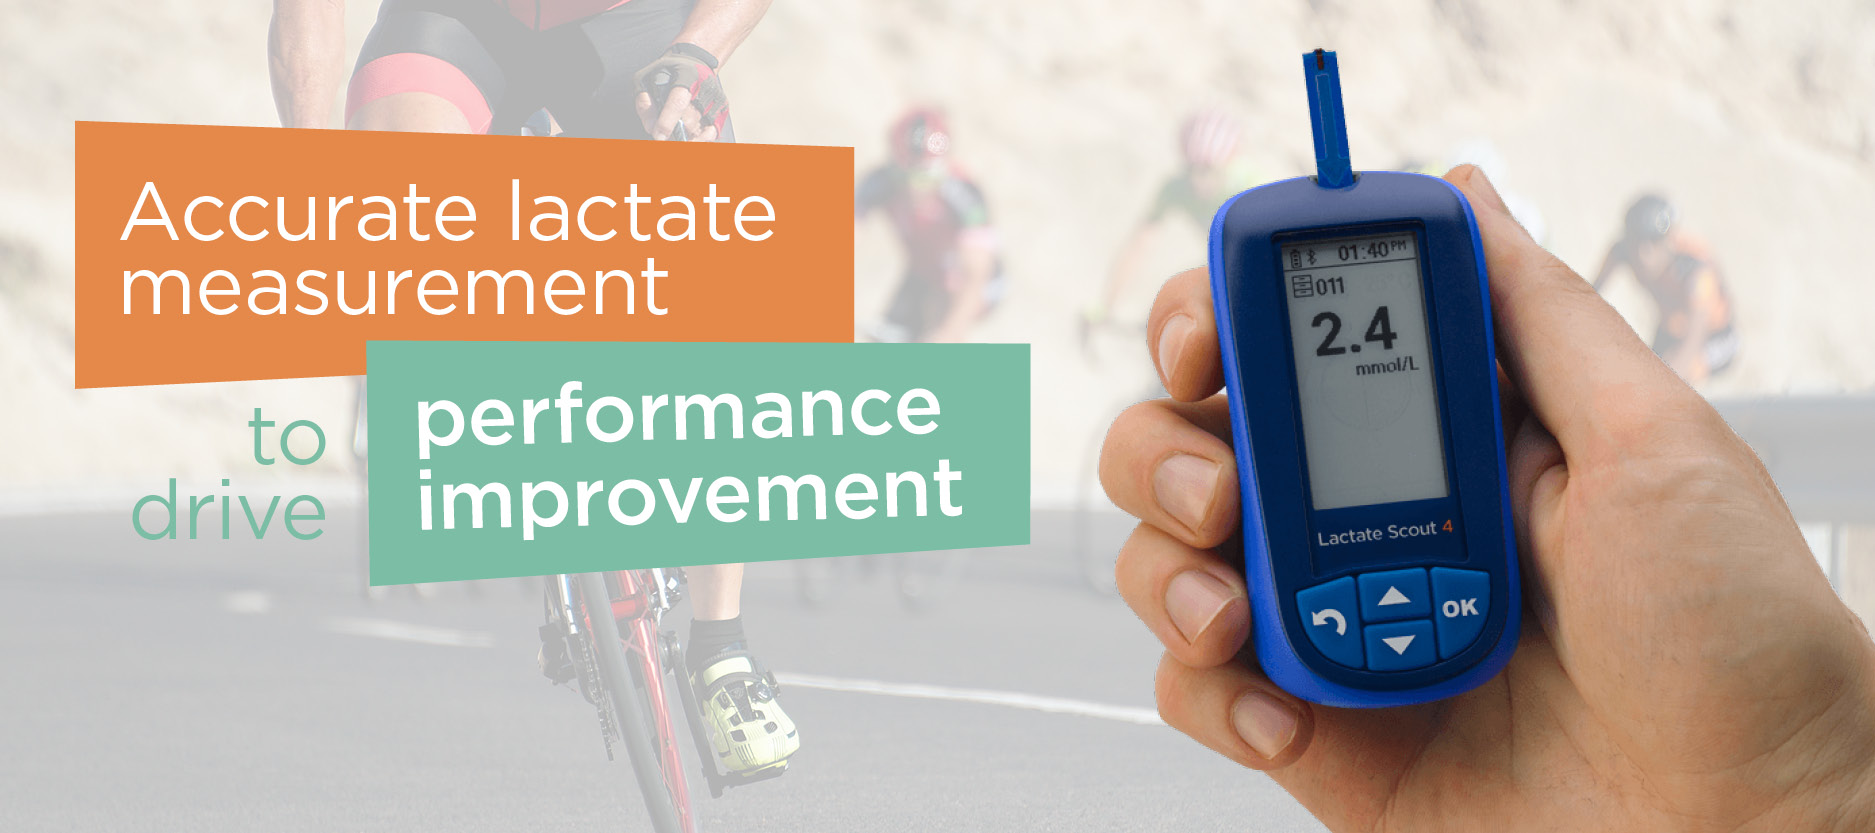 Lactate-scout-4-lancate-analyzer-for-athletes